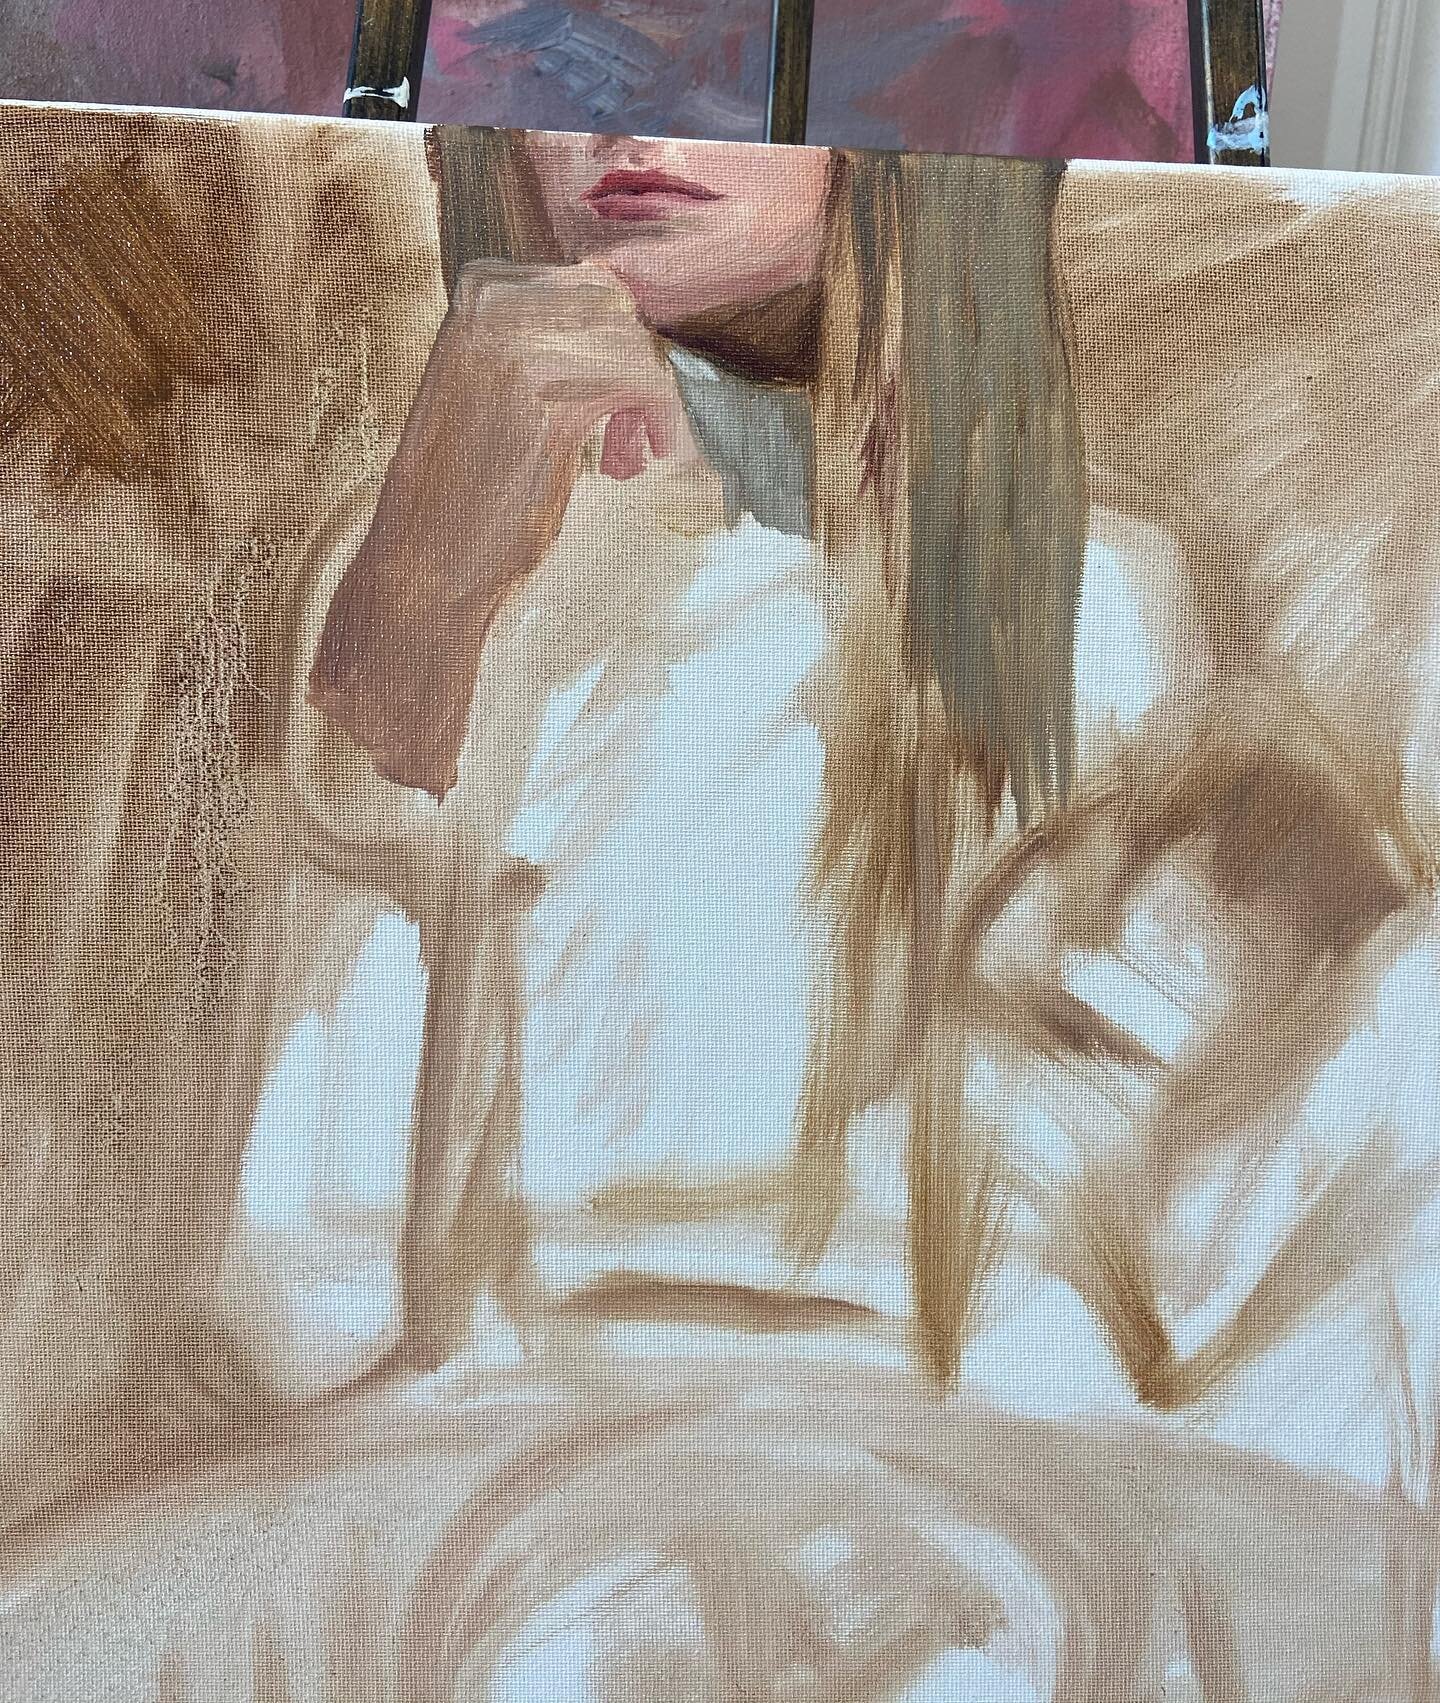 💭 i used to sketch out my figure and grid it perfectly ~ but for me ~ i&rsquo;ve found using a loose underpainting is my favorite. 
It&rsquo;s easier to start a piece this way and allow it to emerge more organically from the canvas ~ trusting it wil